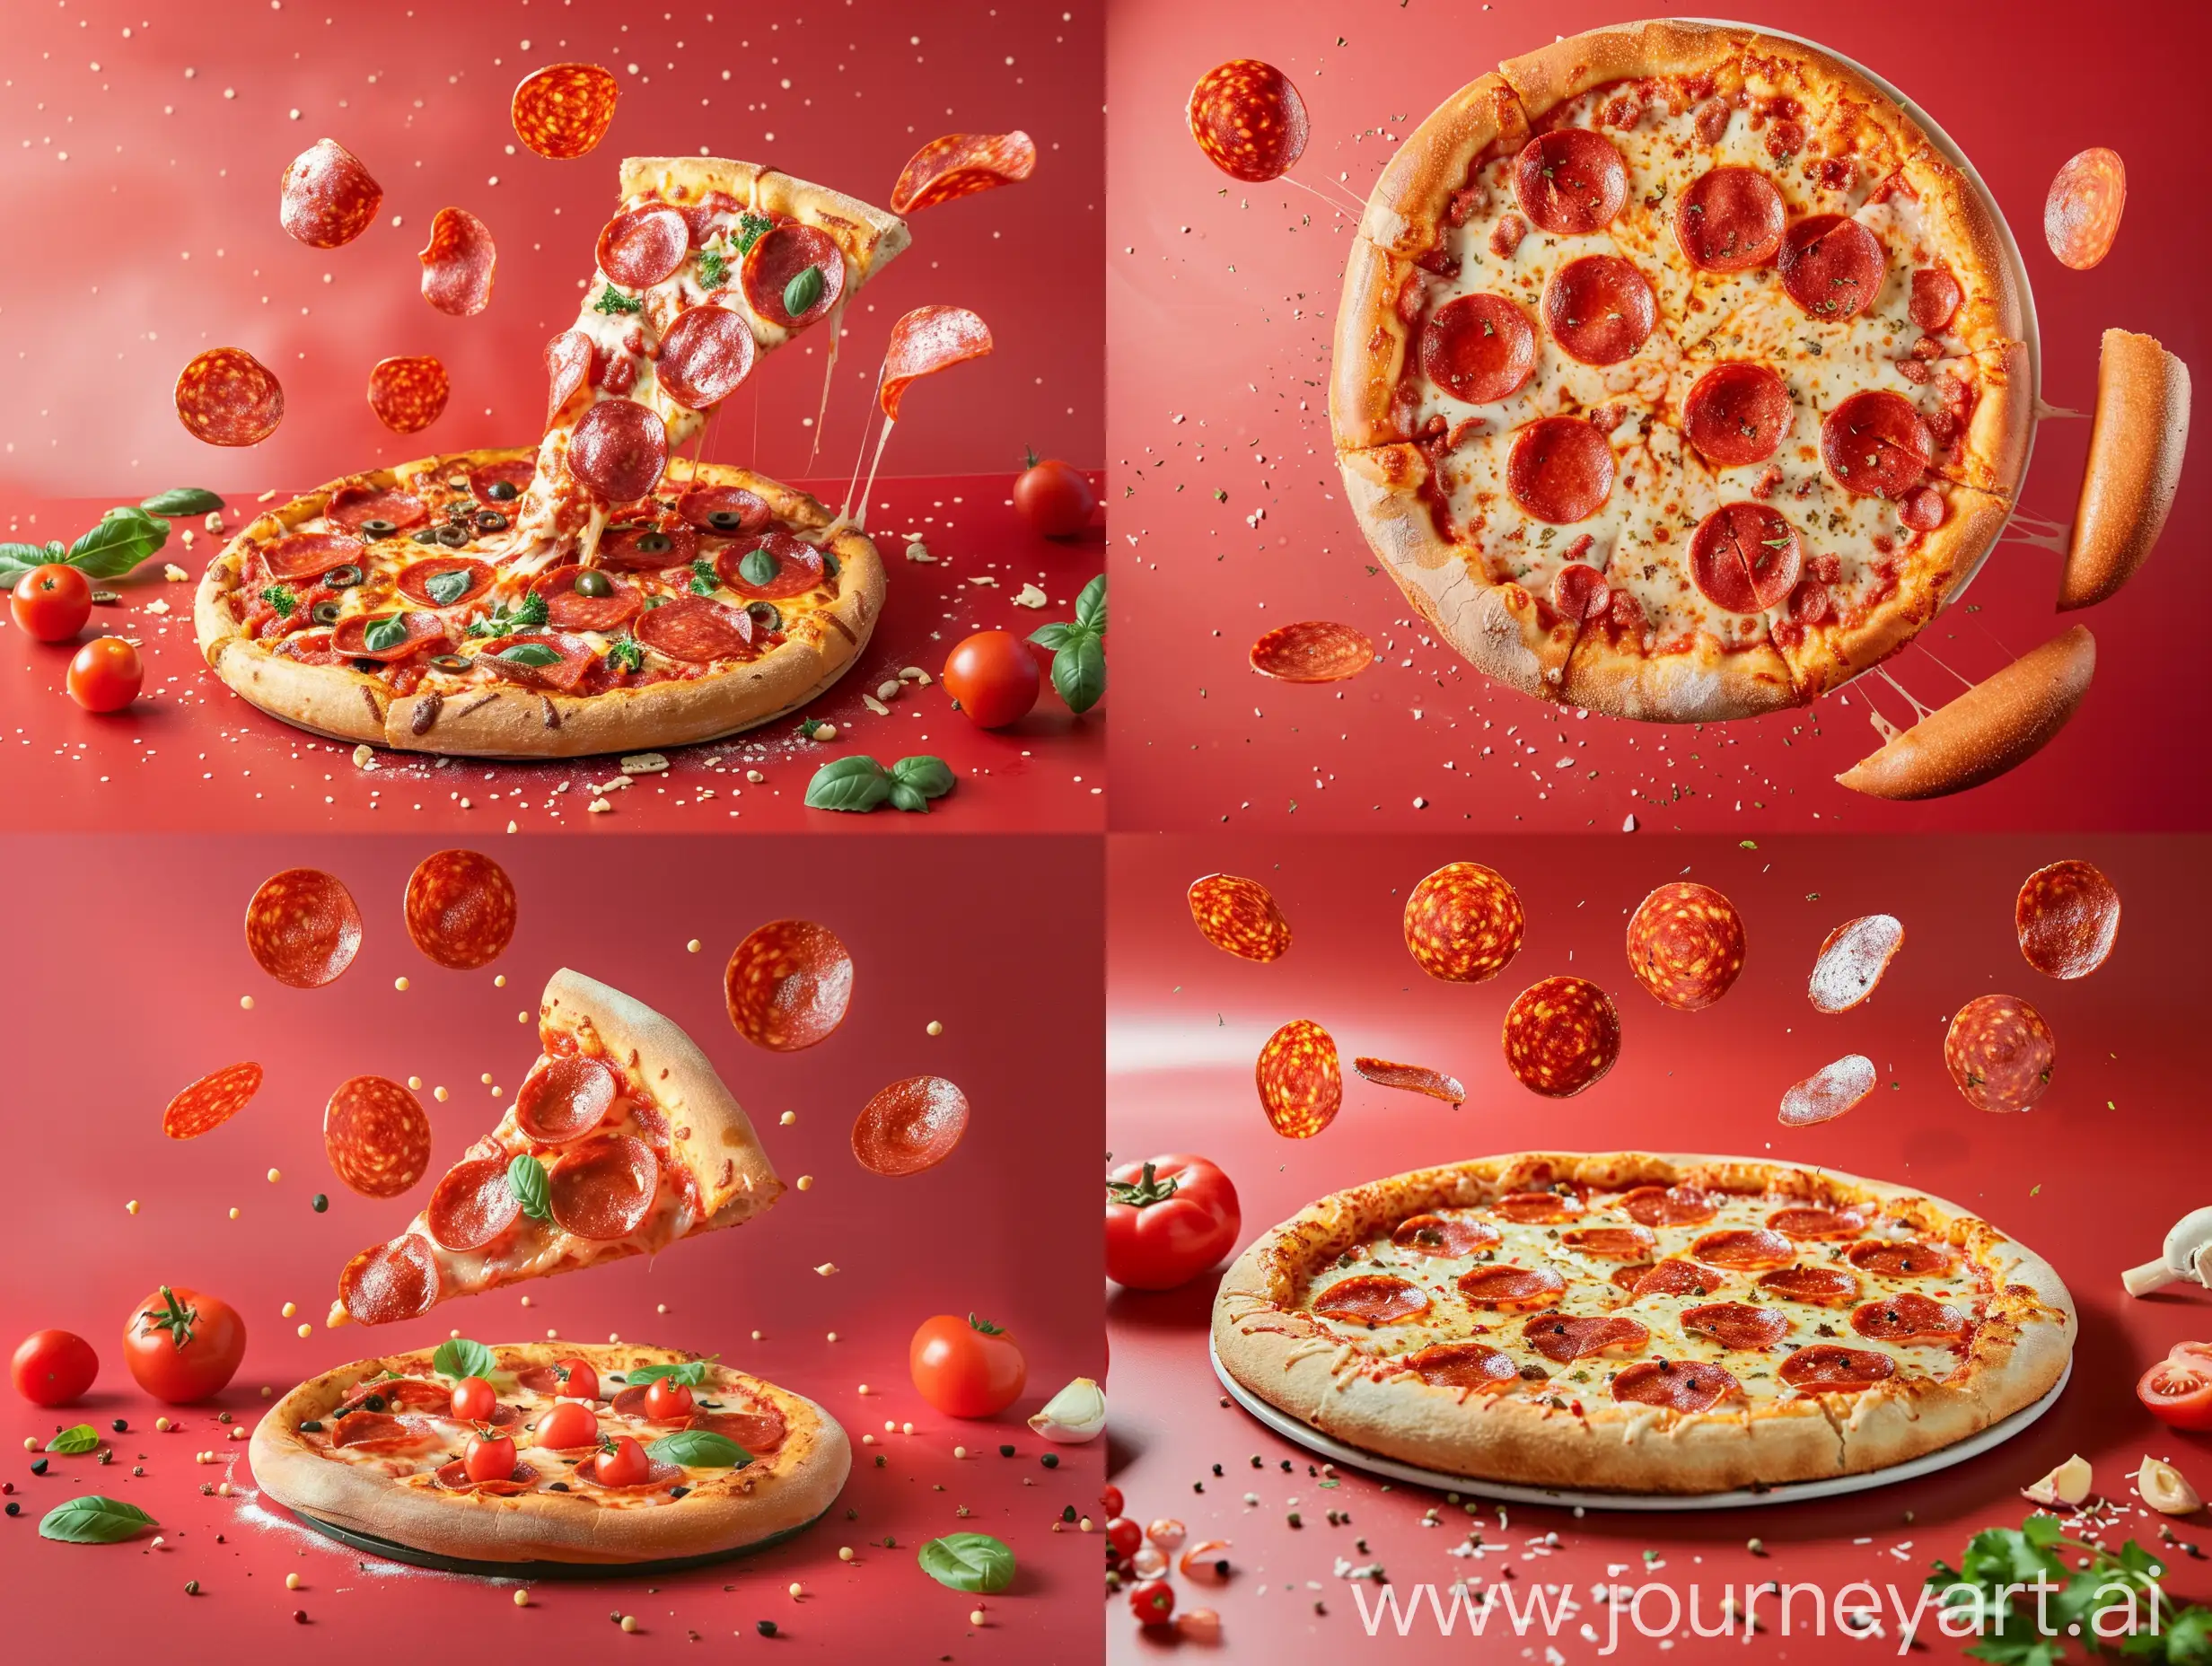 Vibrant-Pepperoni-Pizza-Dynamic-Ingredients-Soar-on-a-Luscious-Red-Canvas